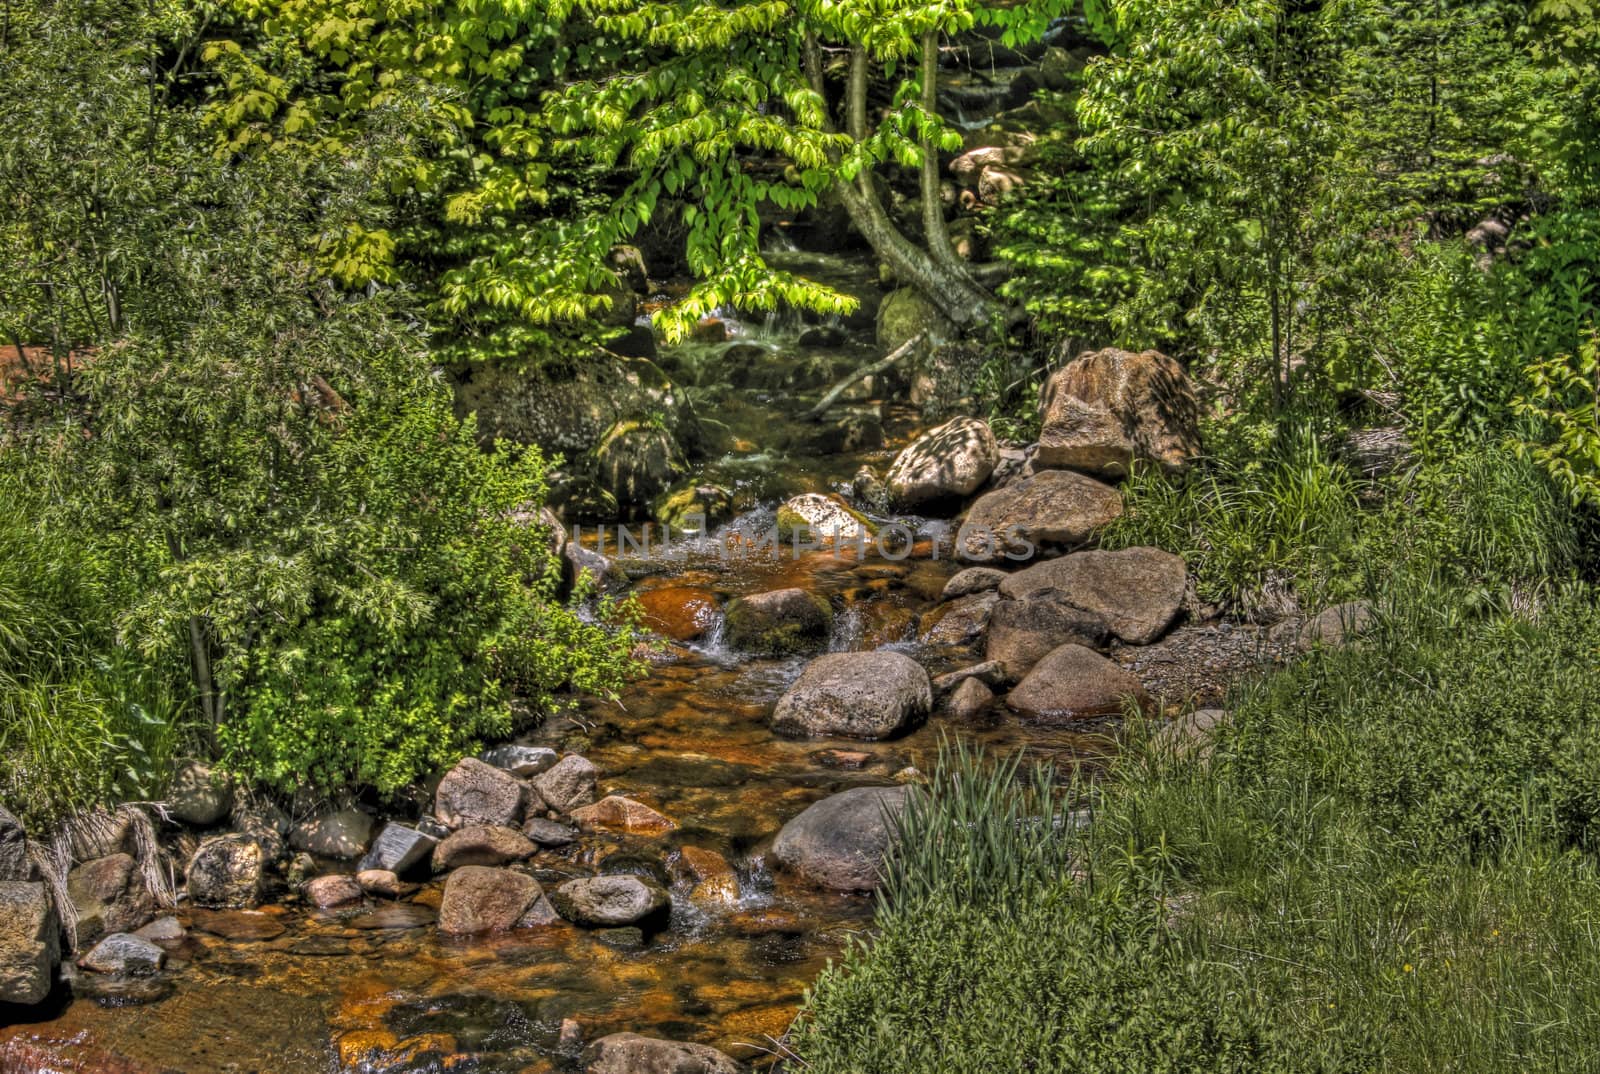 Creek flowing through a forest with rocks and moss